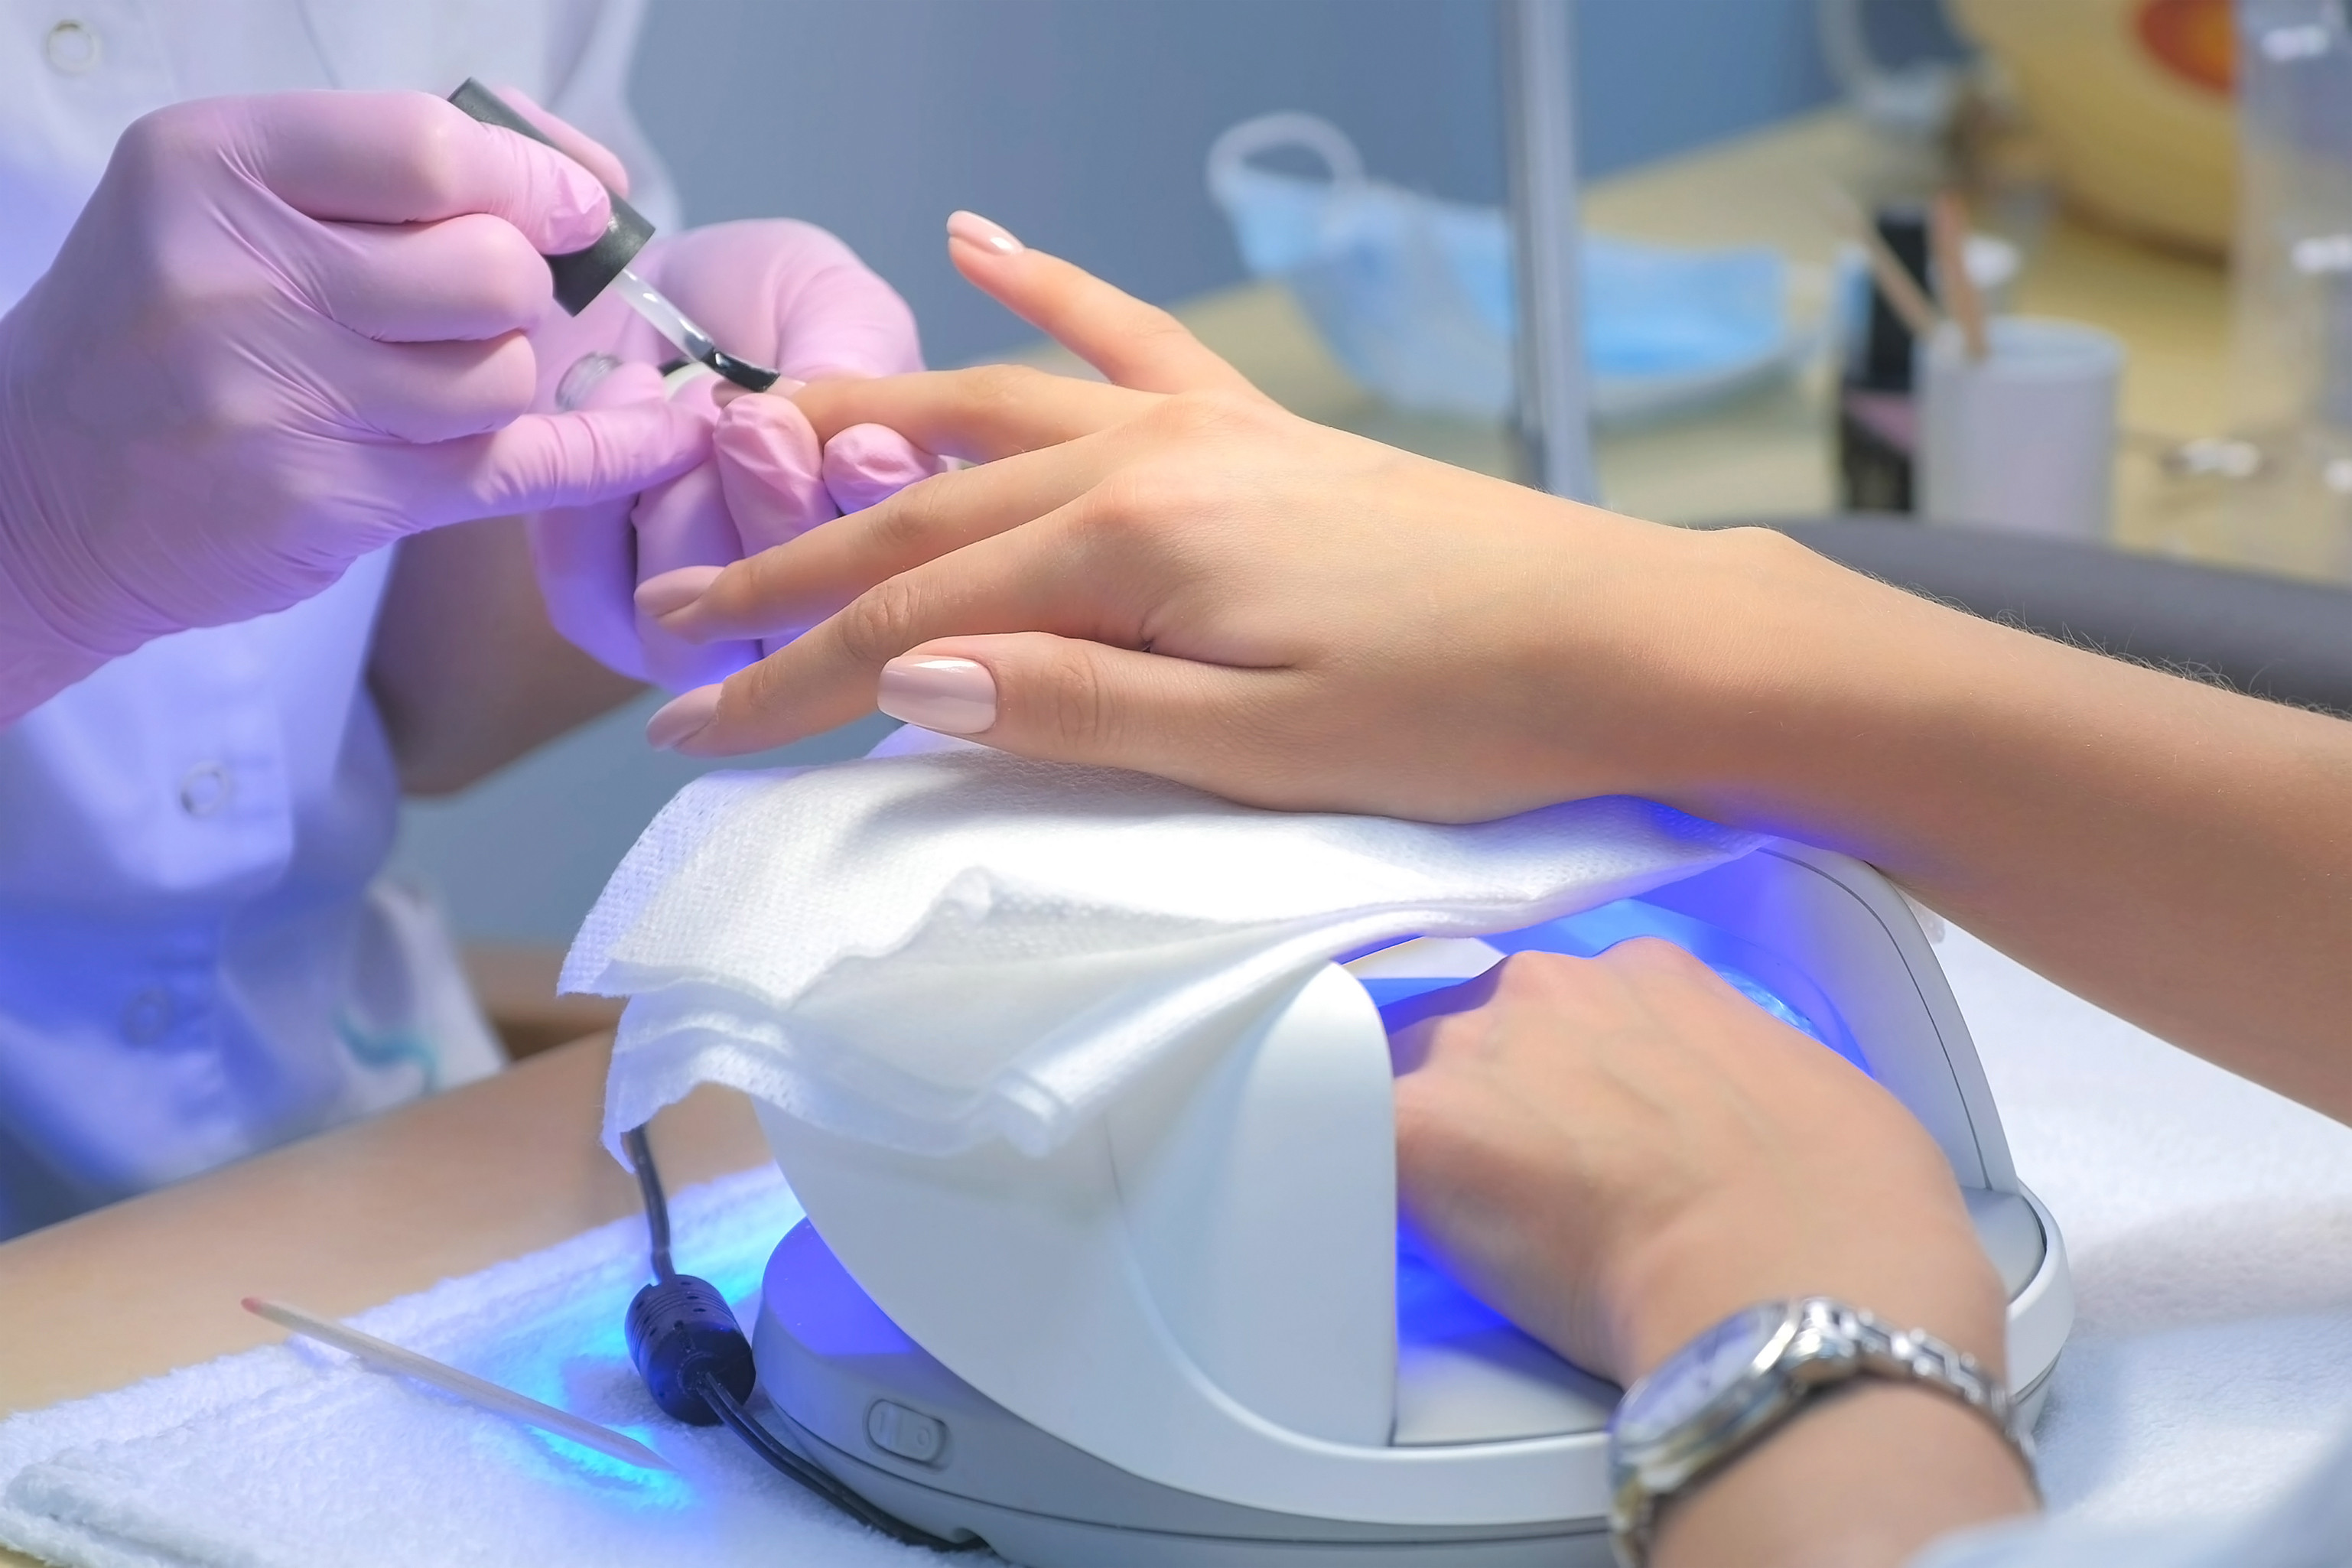 UV nail lamps can damage DNA and cause mutations, new study finds